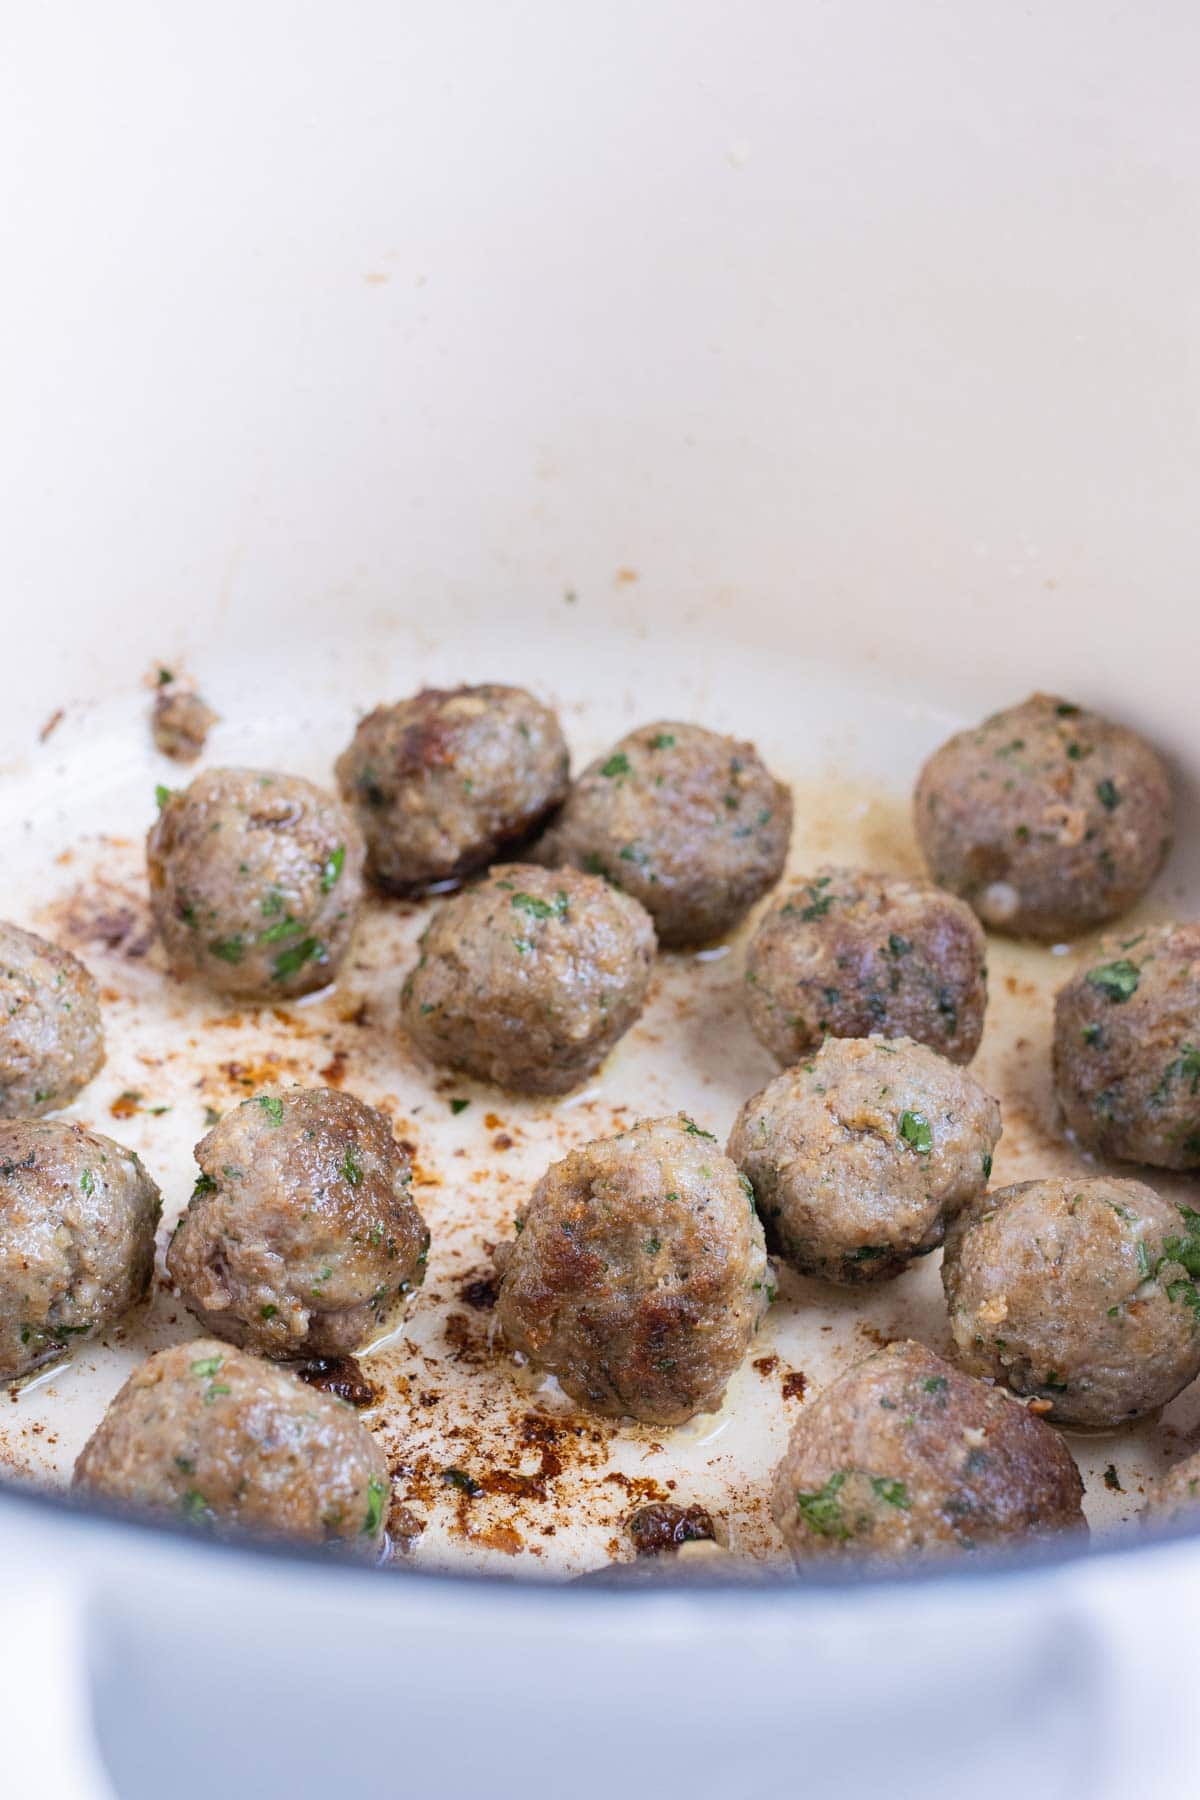 Meatballs are seared in a pan on the stove.